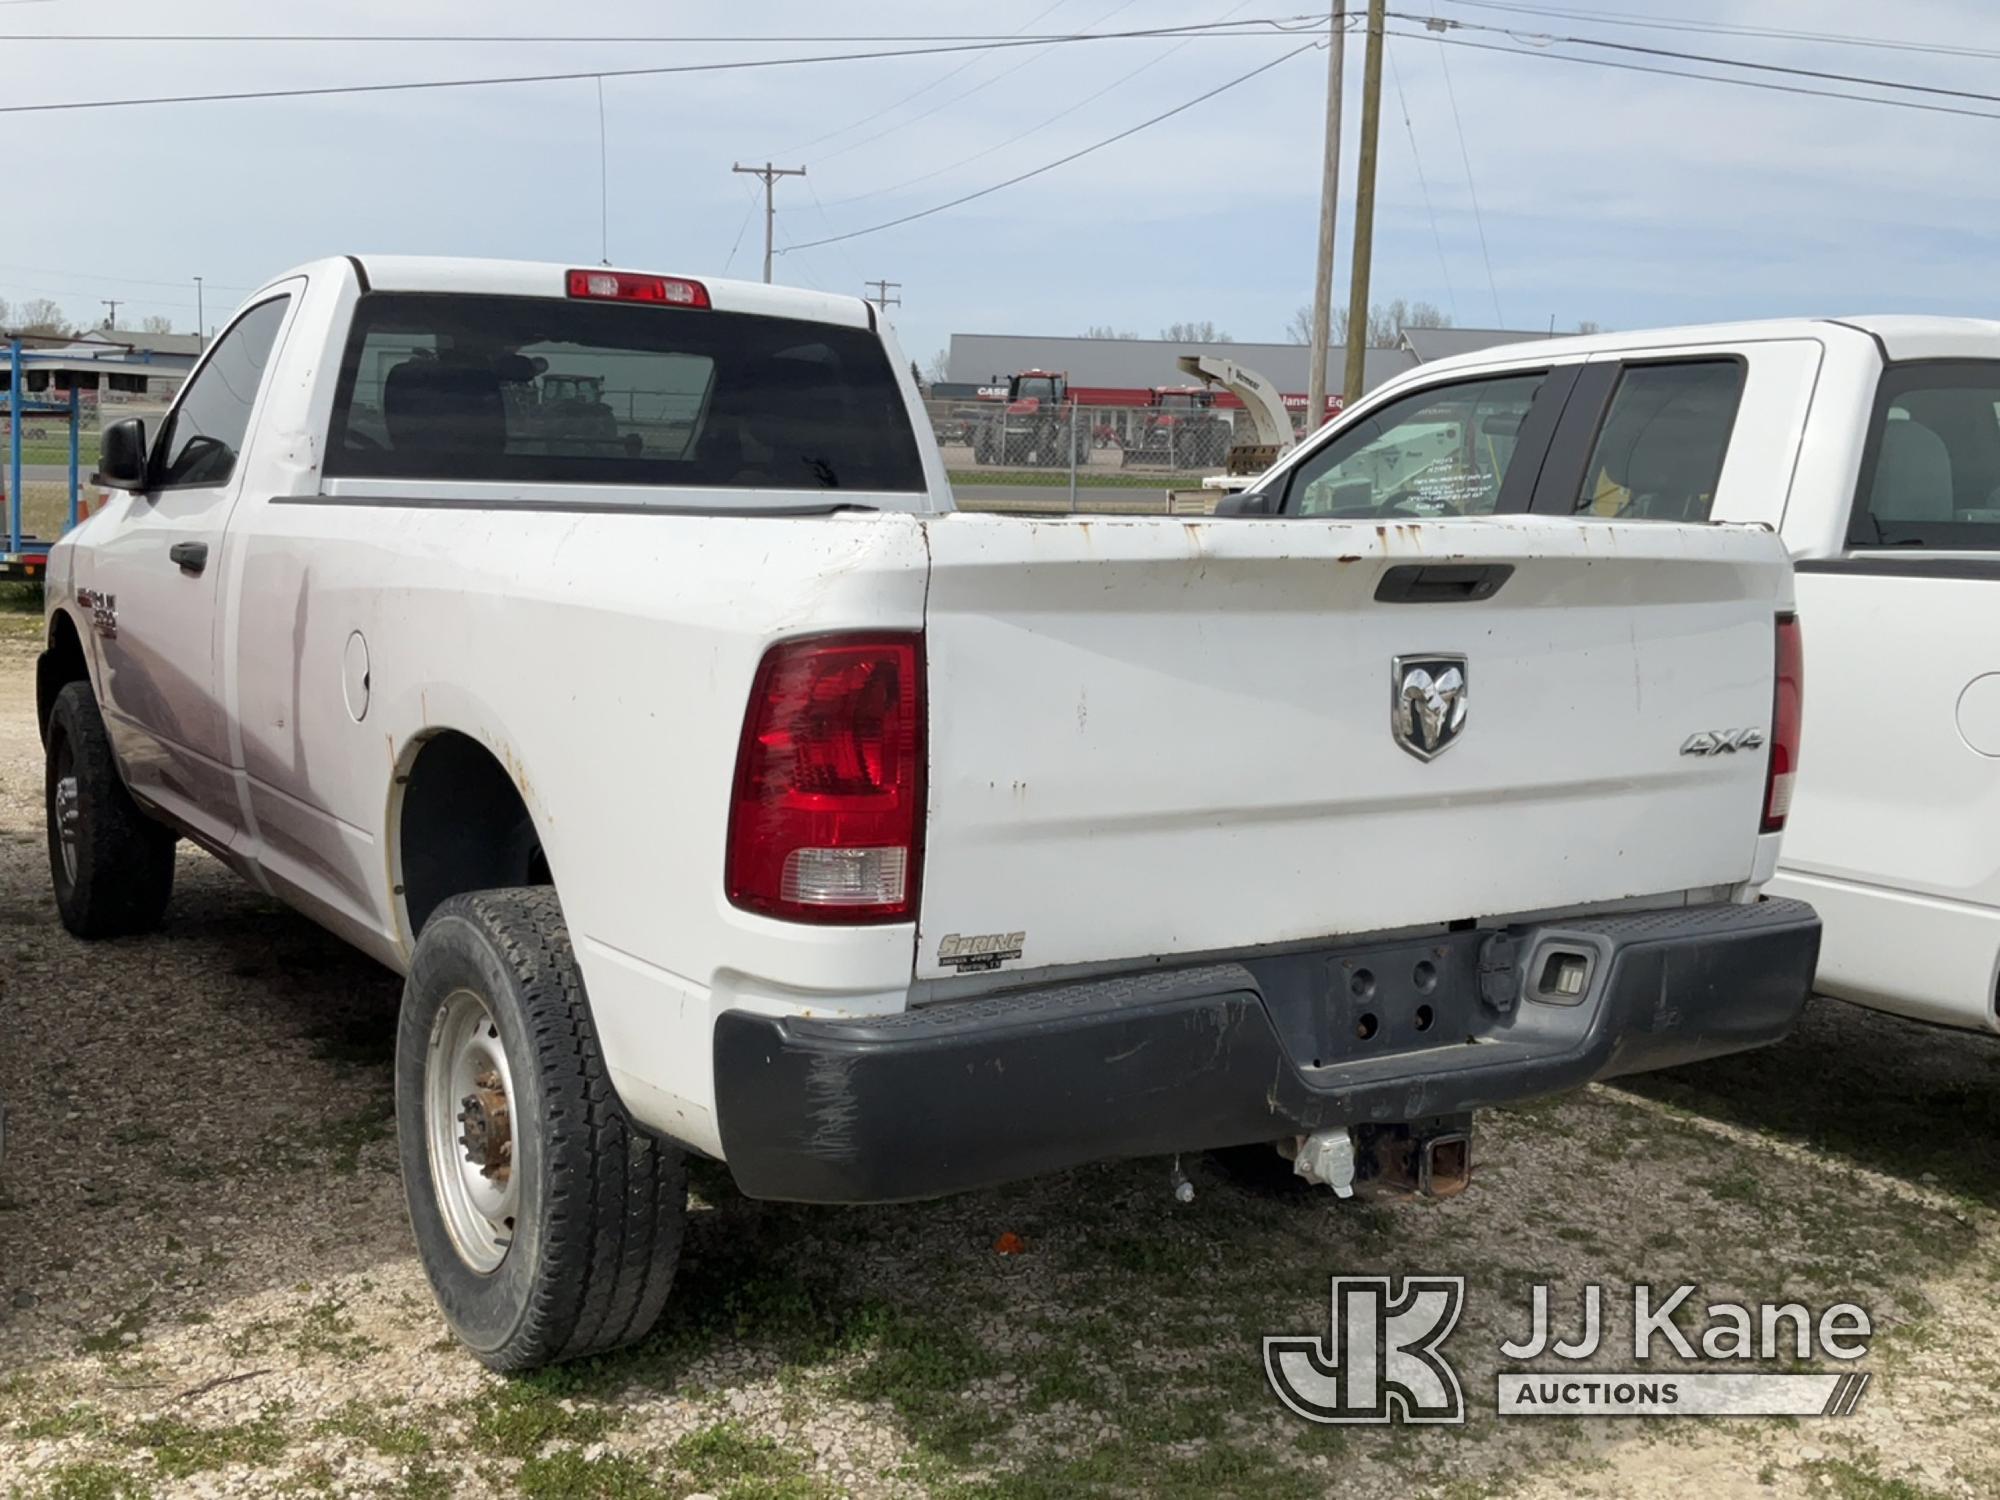 (Charlotte, MI) 2013 RAM 2500 4x4 Pickup Truck Not Running, Condition Unknown, No Crank with Jump, R